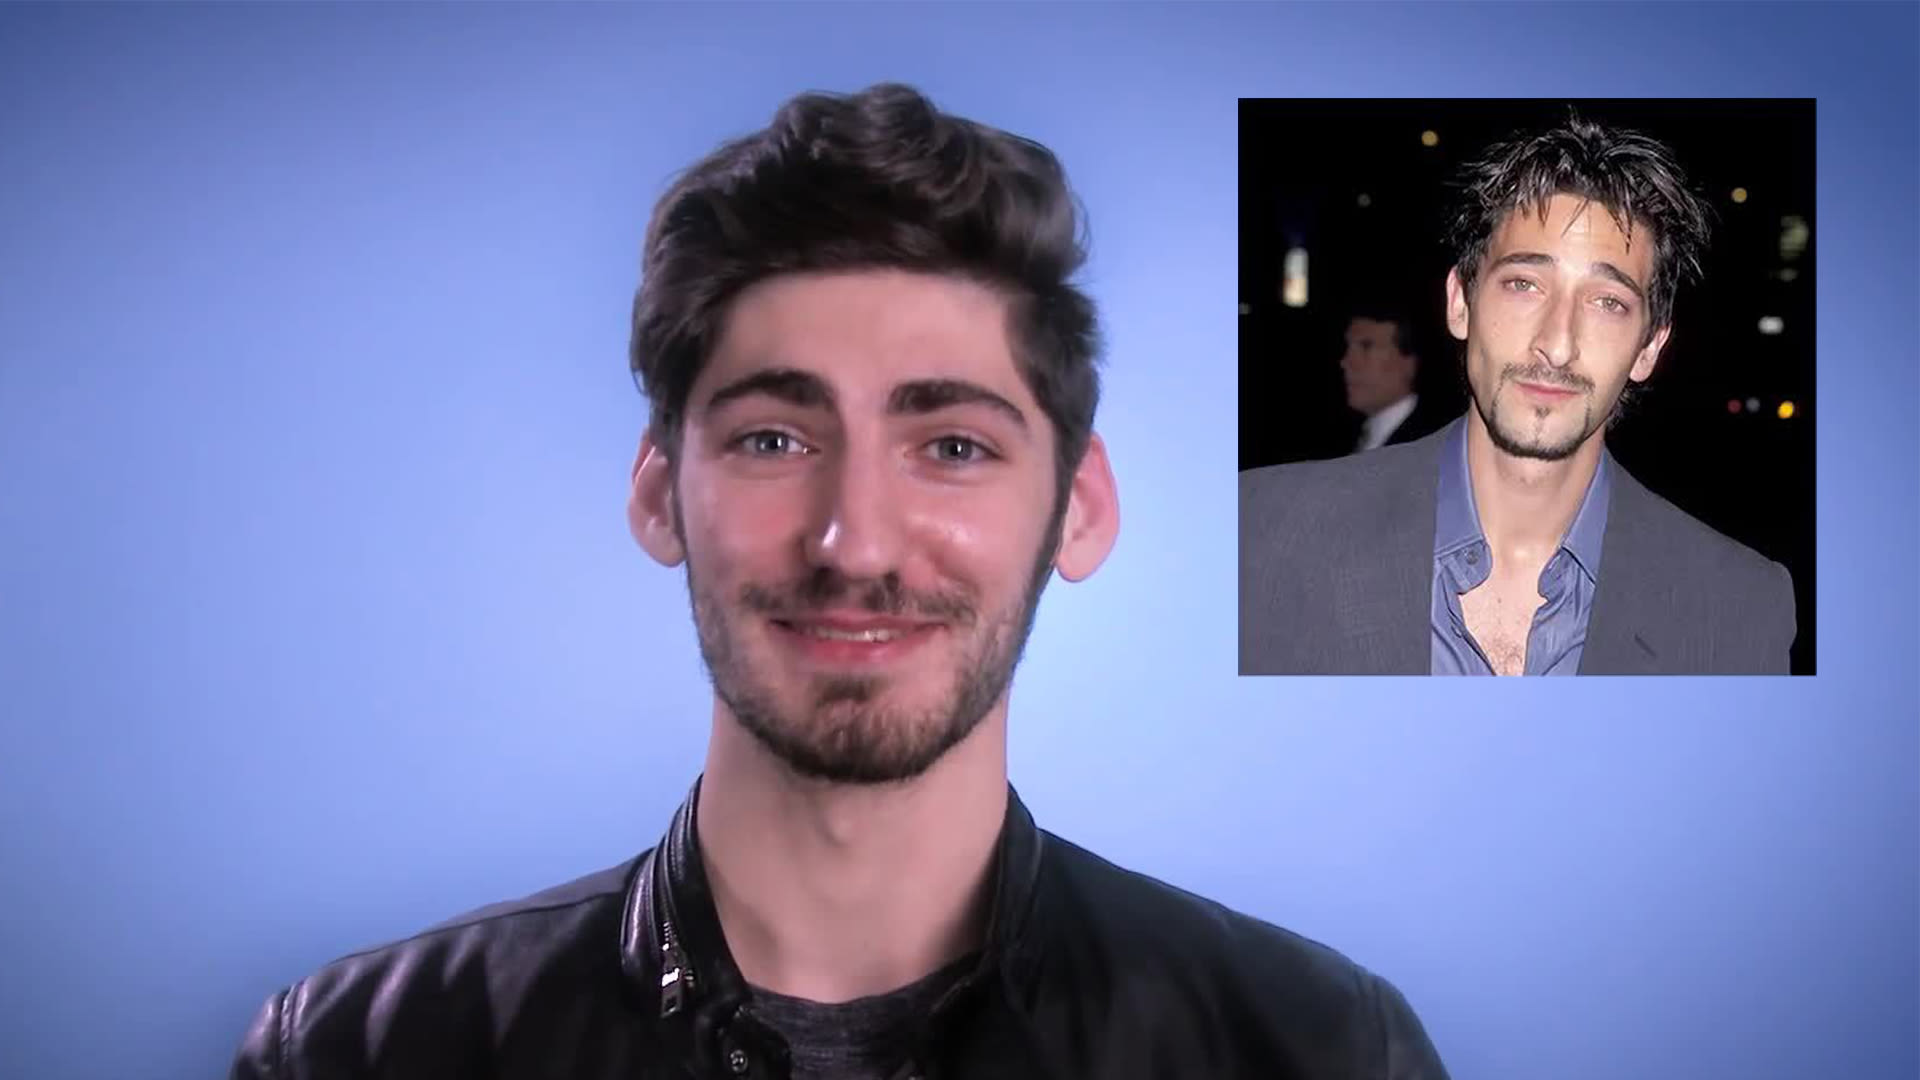 Watch 70 People Ages 5 75 Answer What Celebrity Do You Look Like 5 75 Glamour